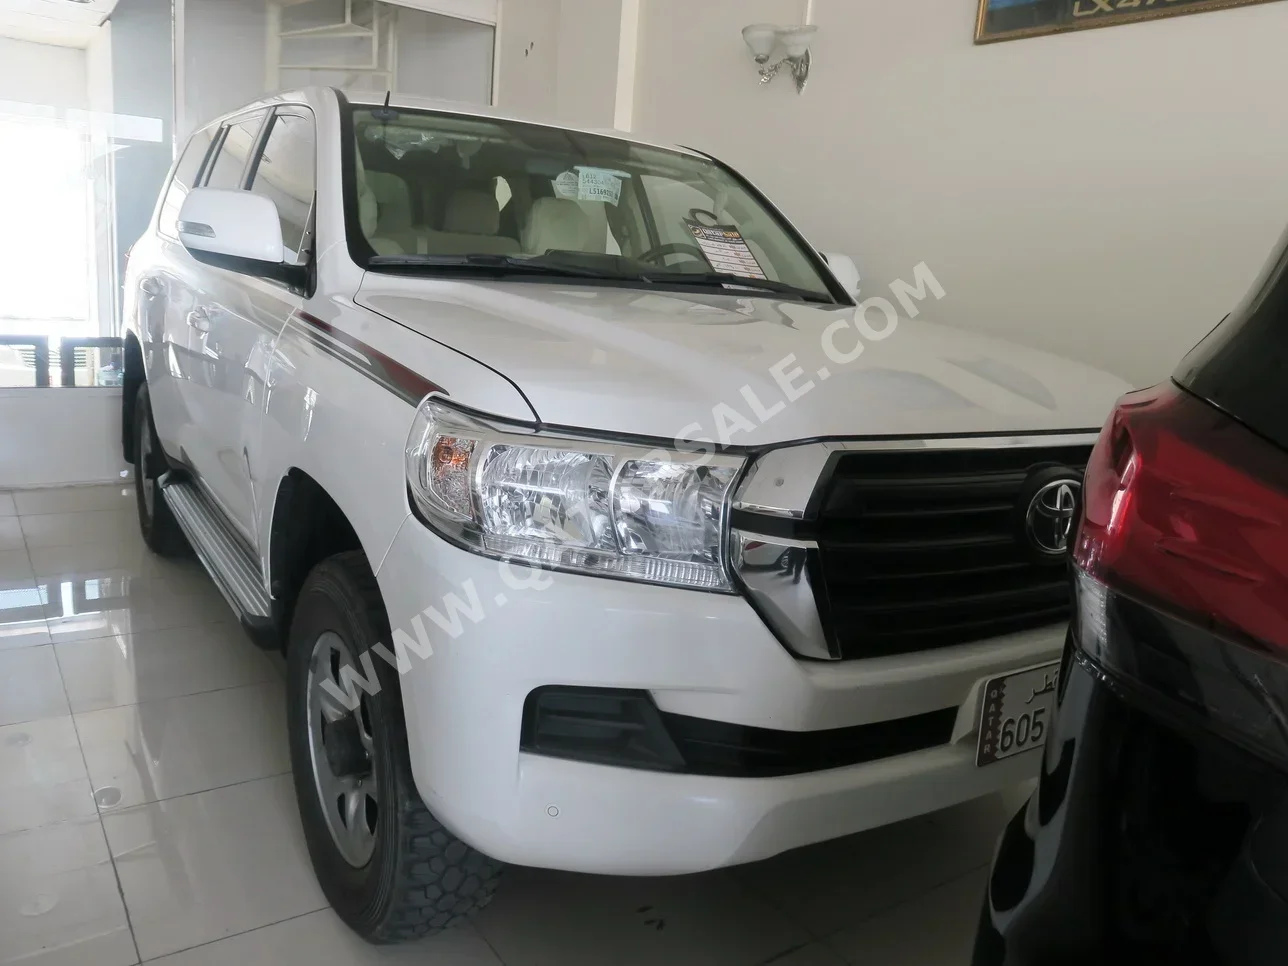  Toyota  Land Cruiser  GX  2020  Automatic  196,000 Km  6 Cylinder  Four Wheel Drive (4WD)  SUV  White  With Warranty